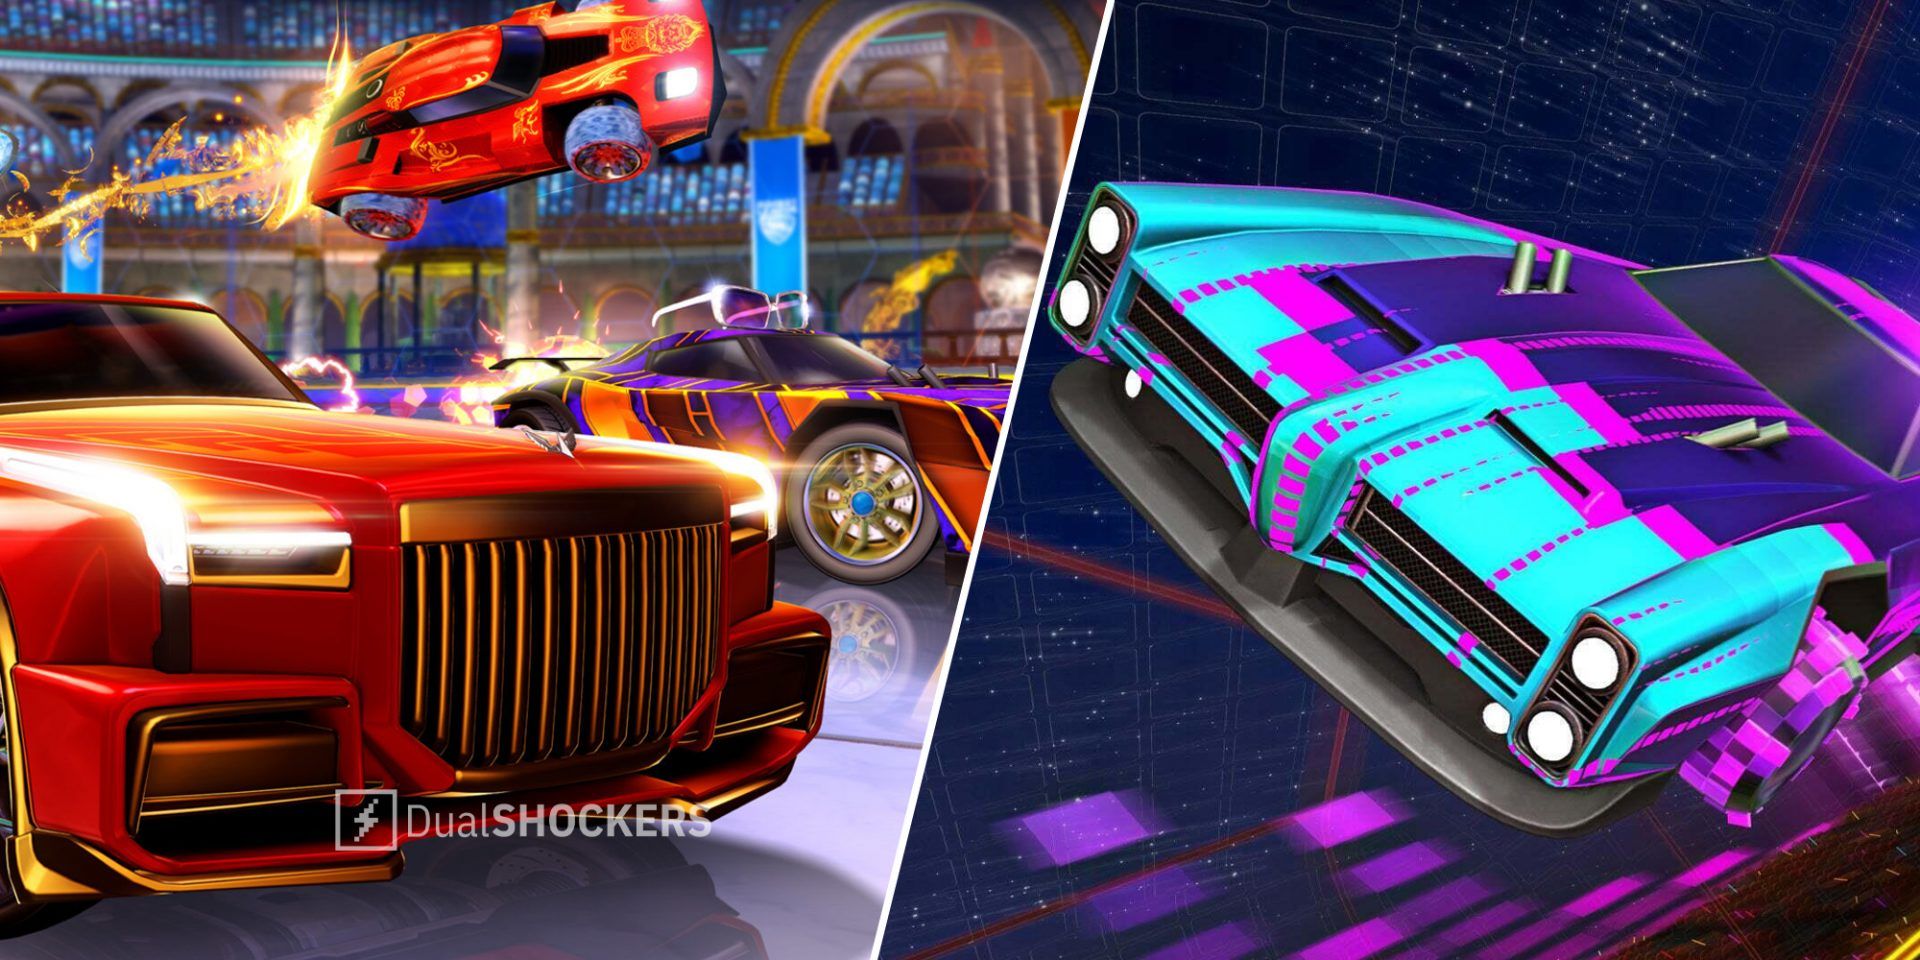 Rocket League season 7 new cars on left, Rocket League car in the air on right